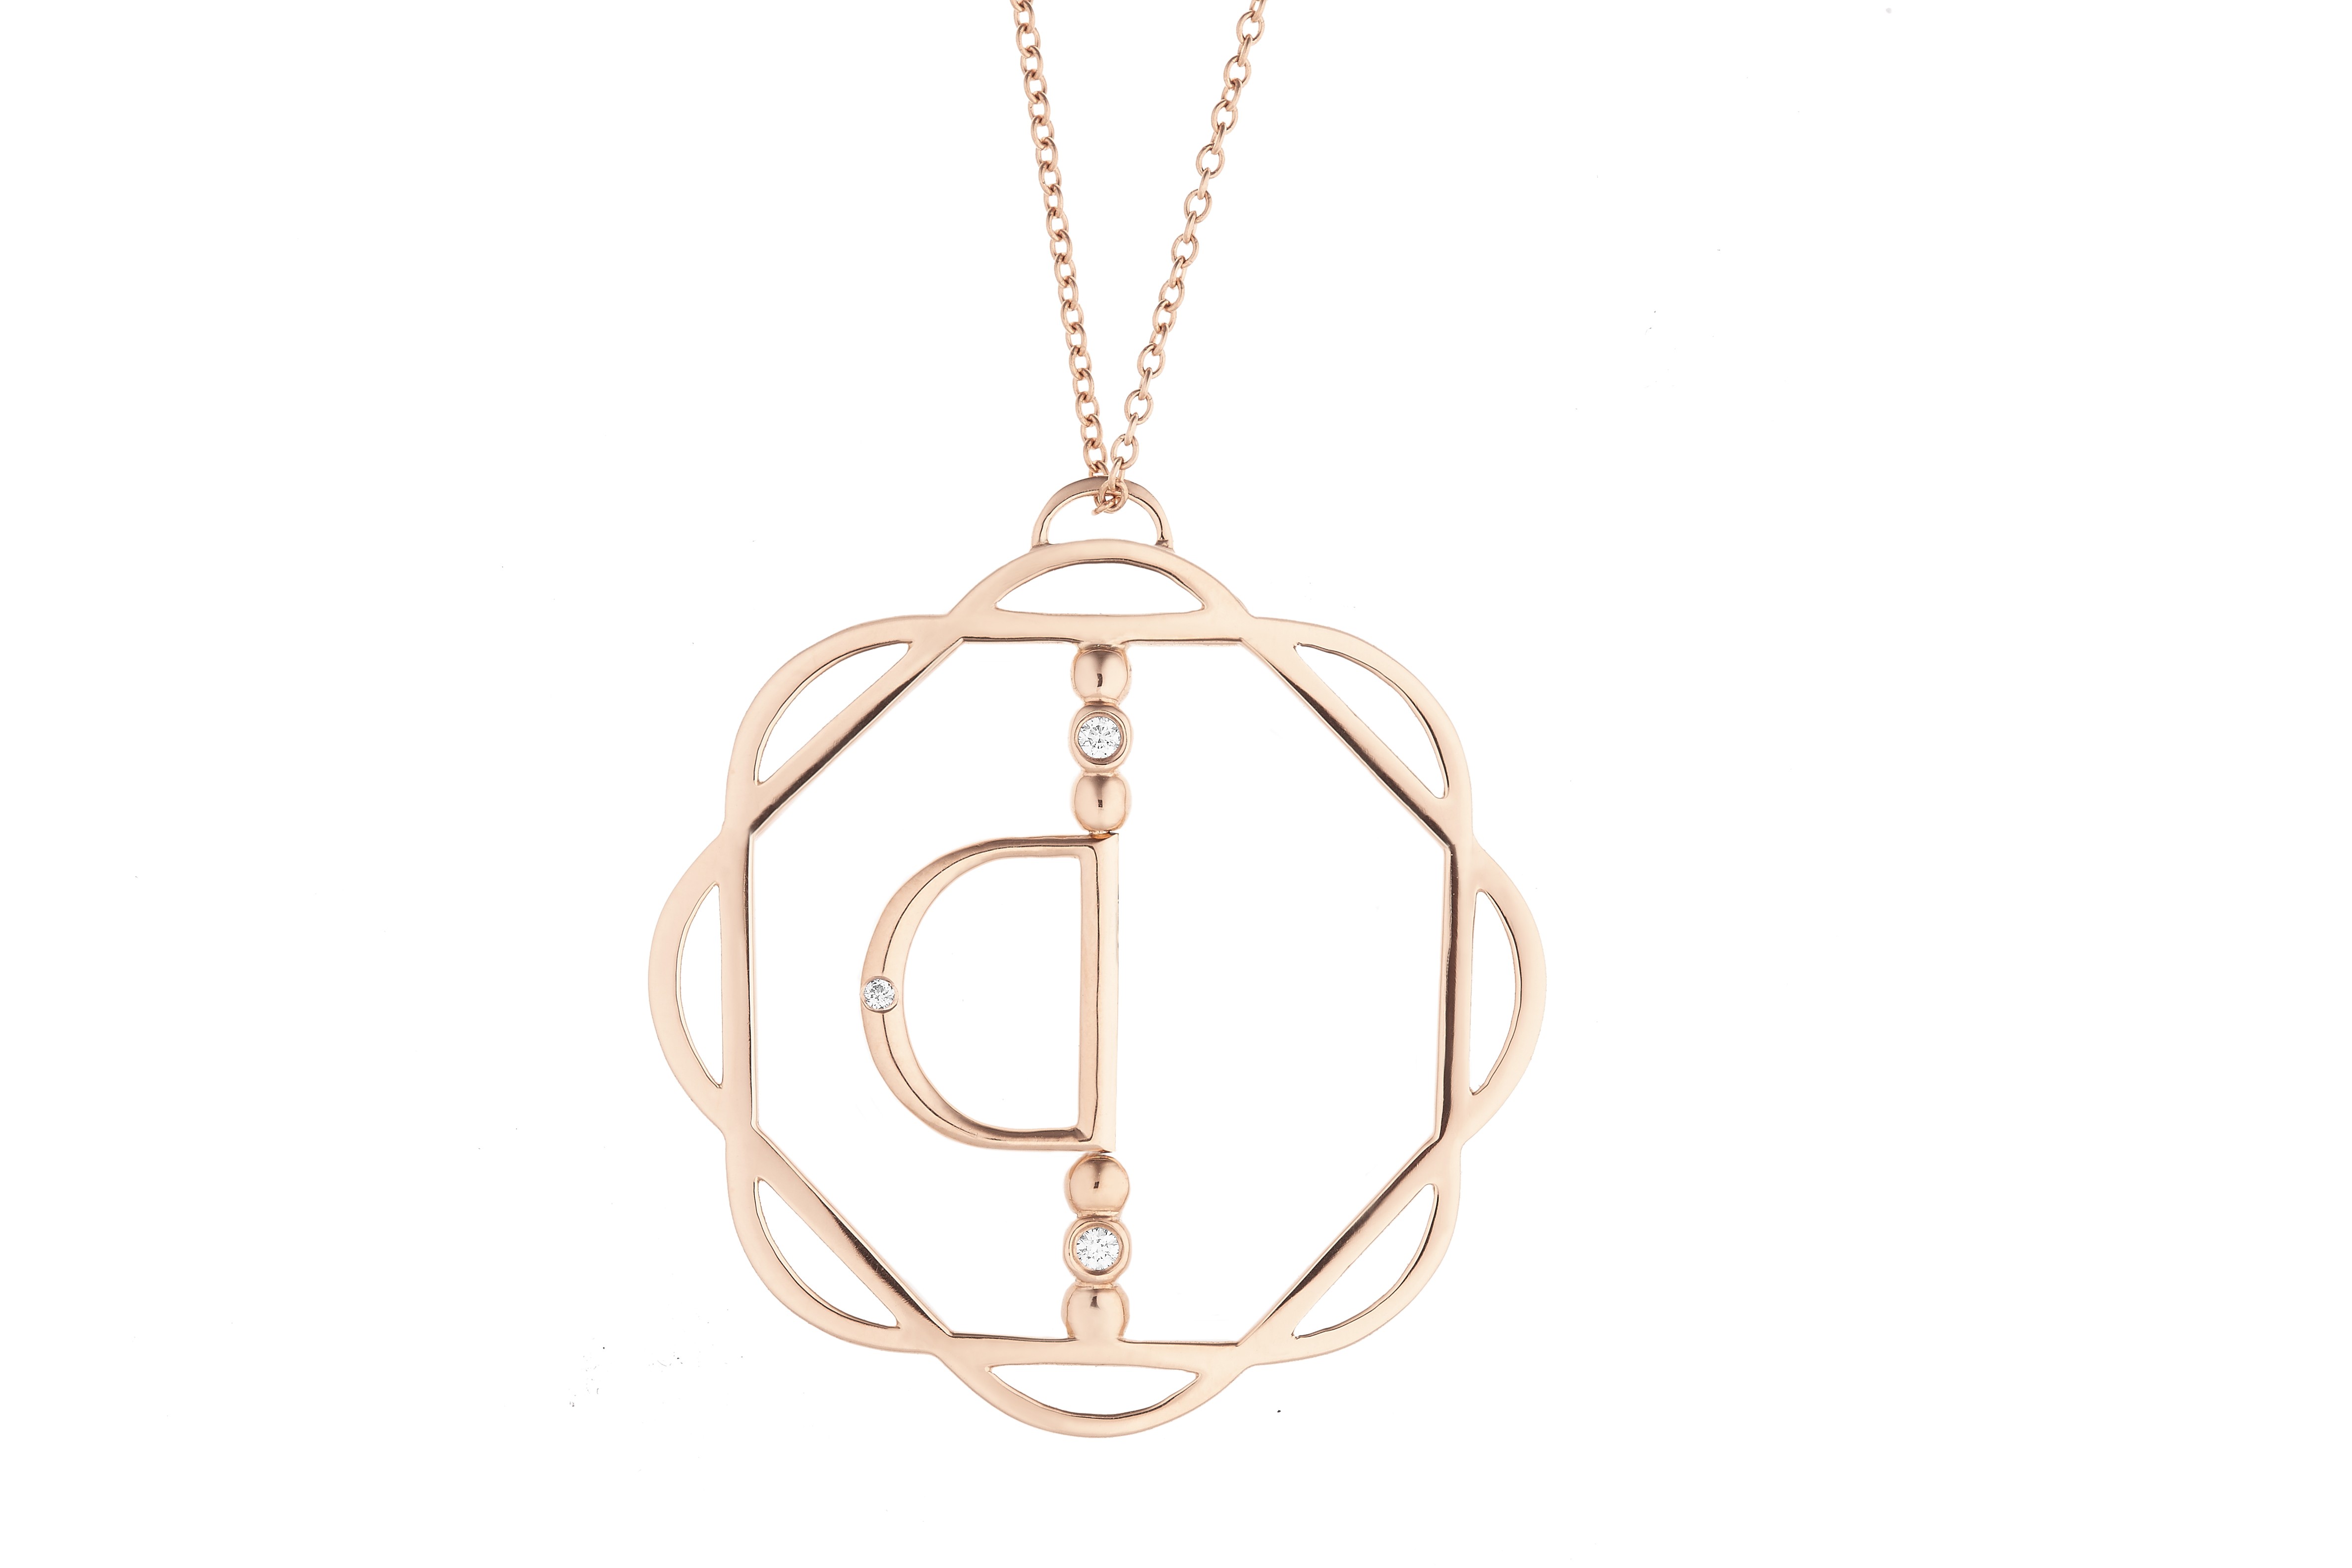 18K Rose Gold Cut-Out Flora Pendant with Mirror D and 3 Lab Created Diamonds on AIDIA Extendable Link Chain